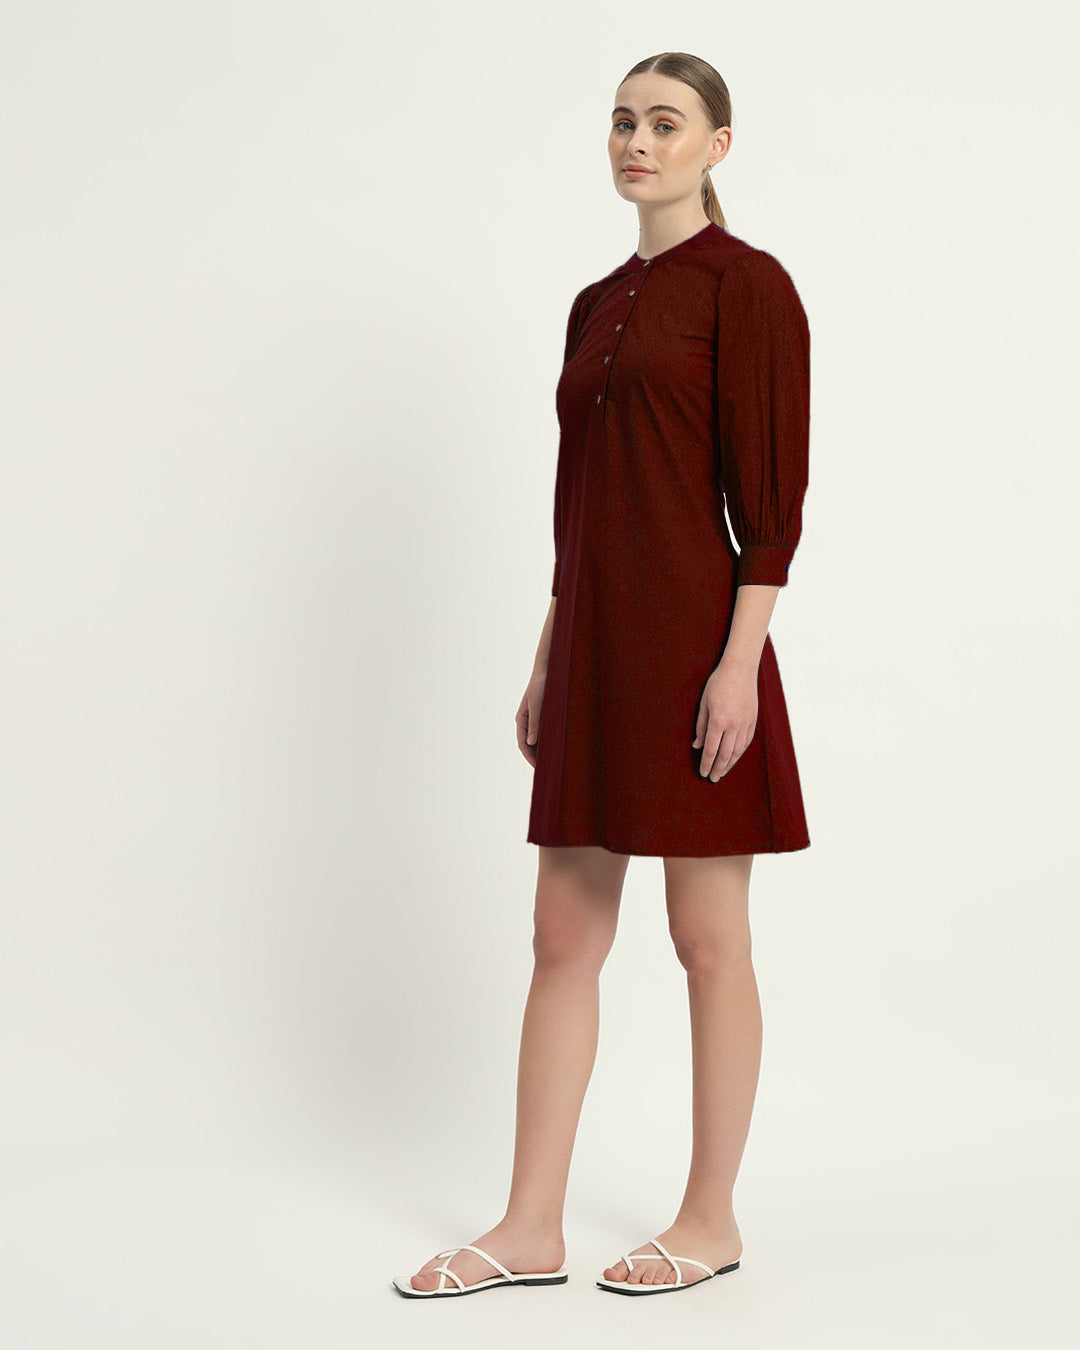 The Rouge Roslyn Cotton Dress